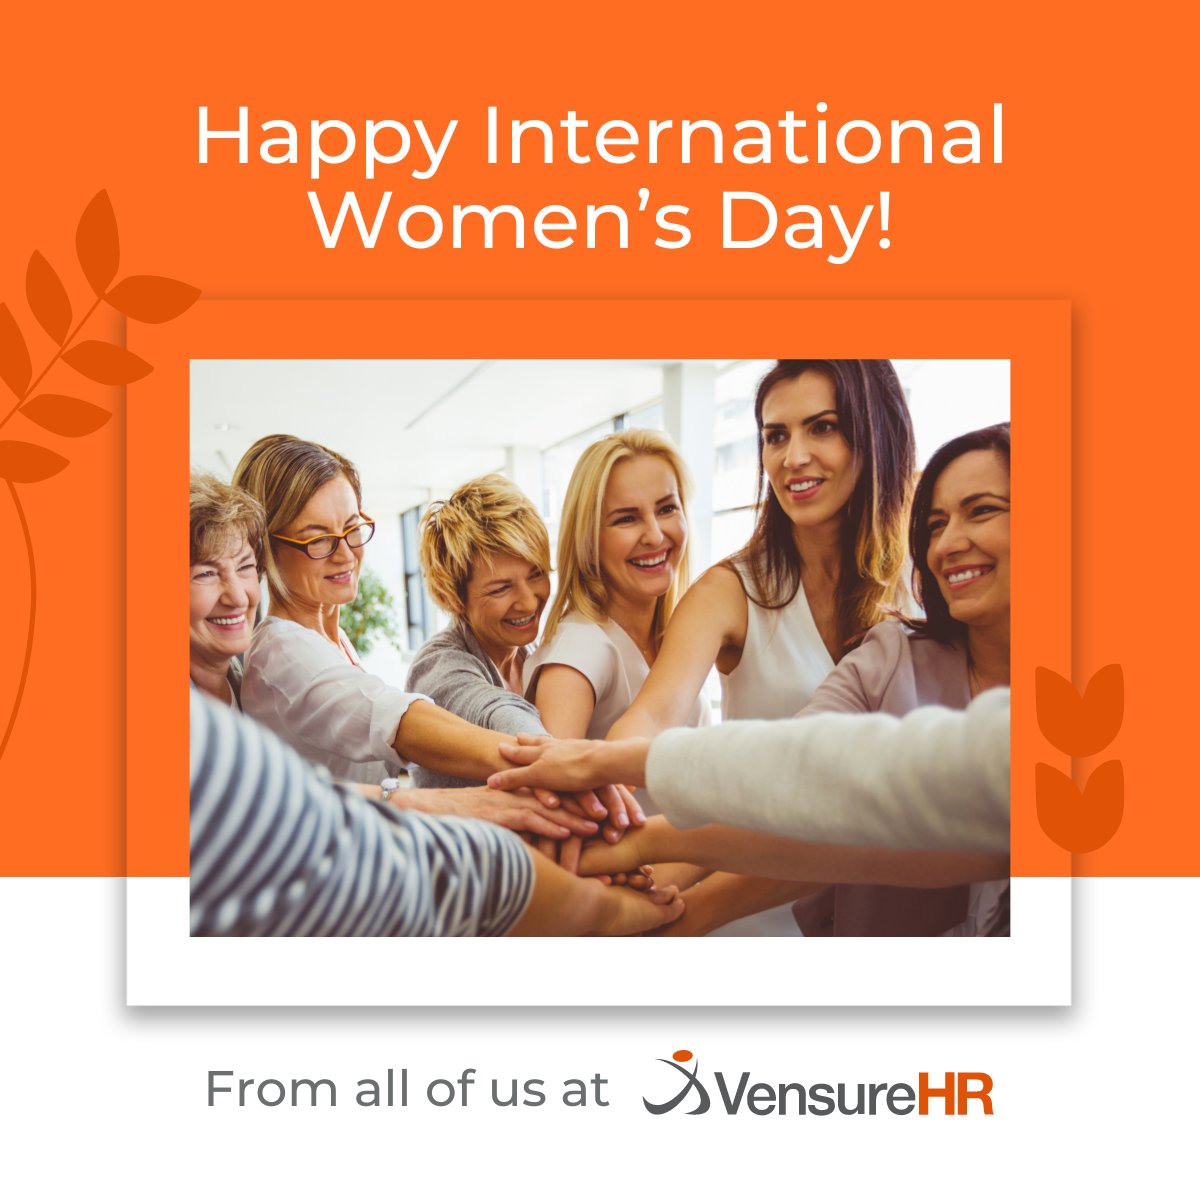 Happy International Women's Day to all the incredible women in our organization and beyond! Your strength, resilience, and leadership drive our success every day. 🧡